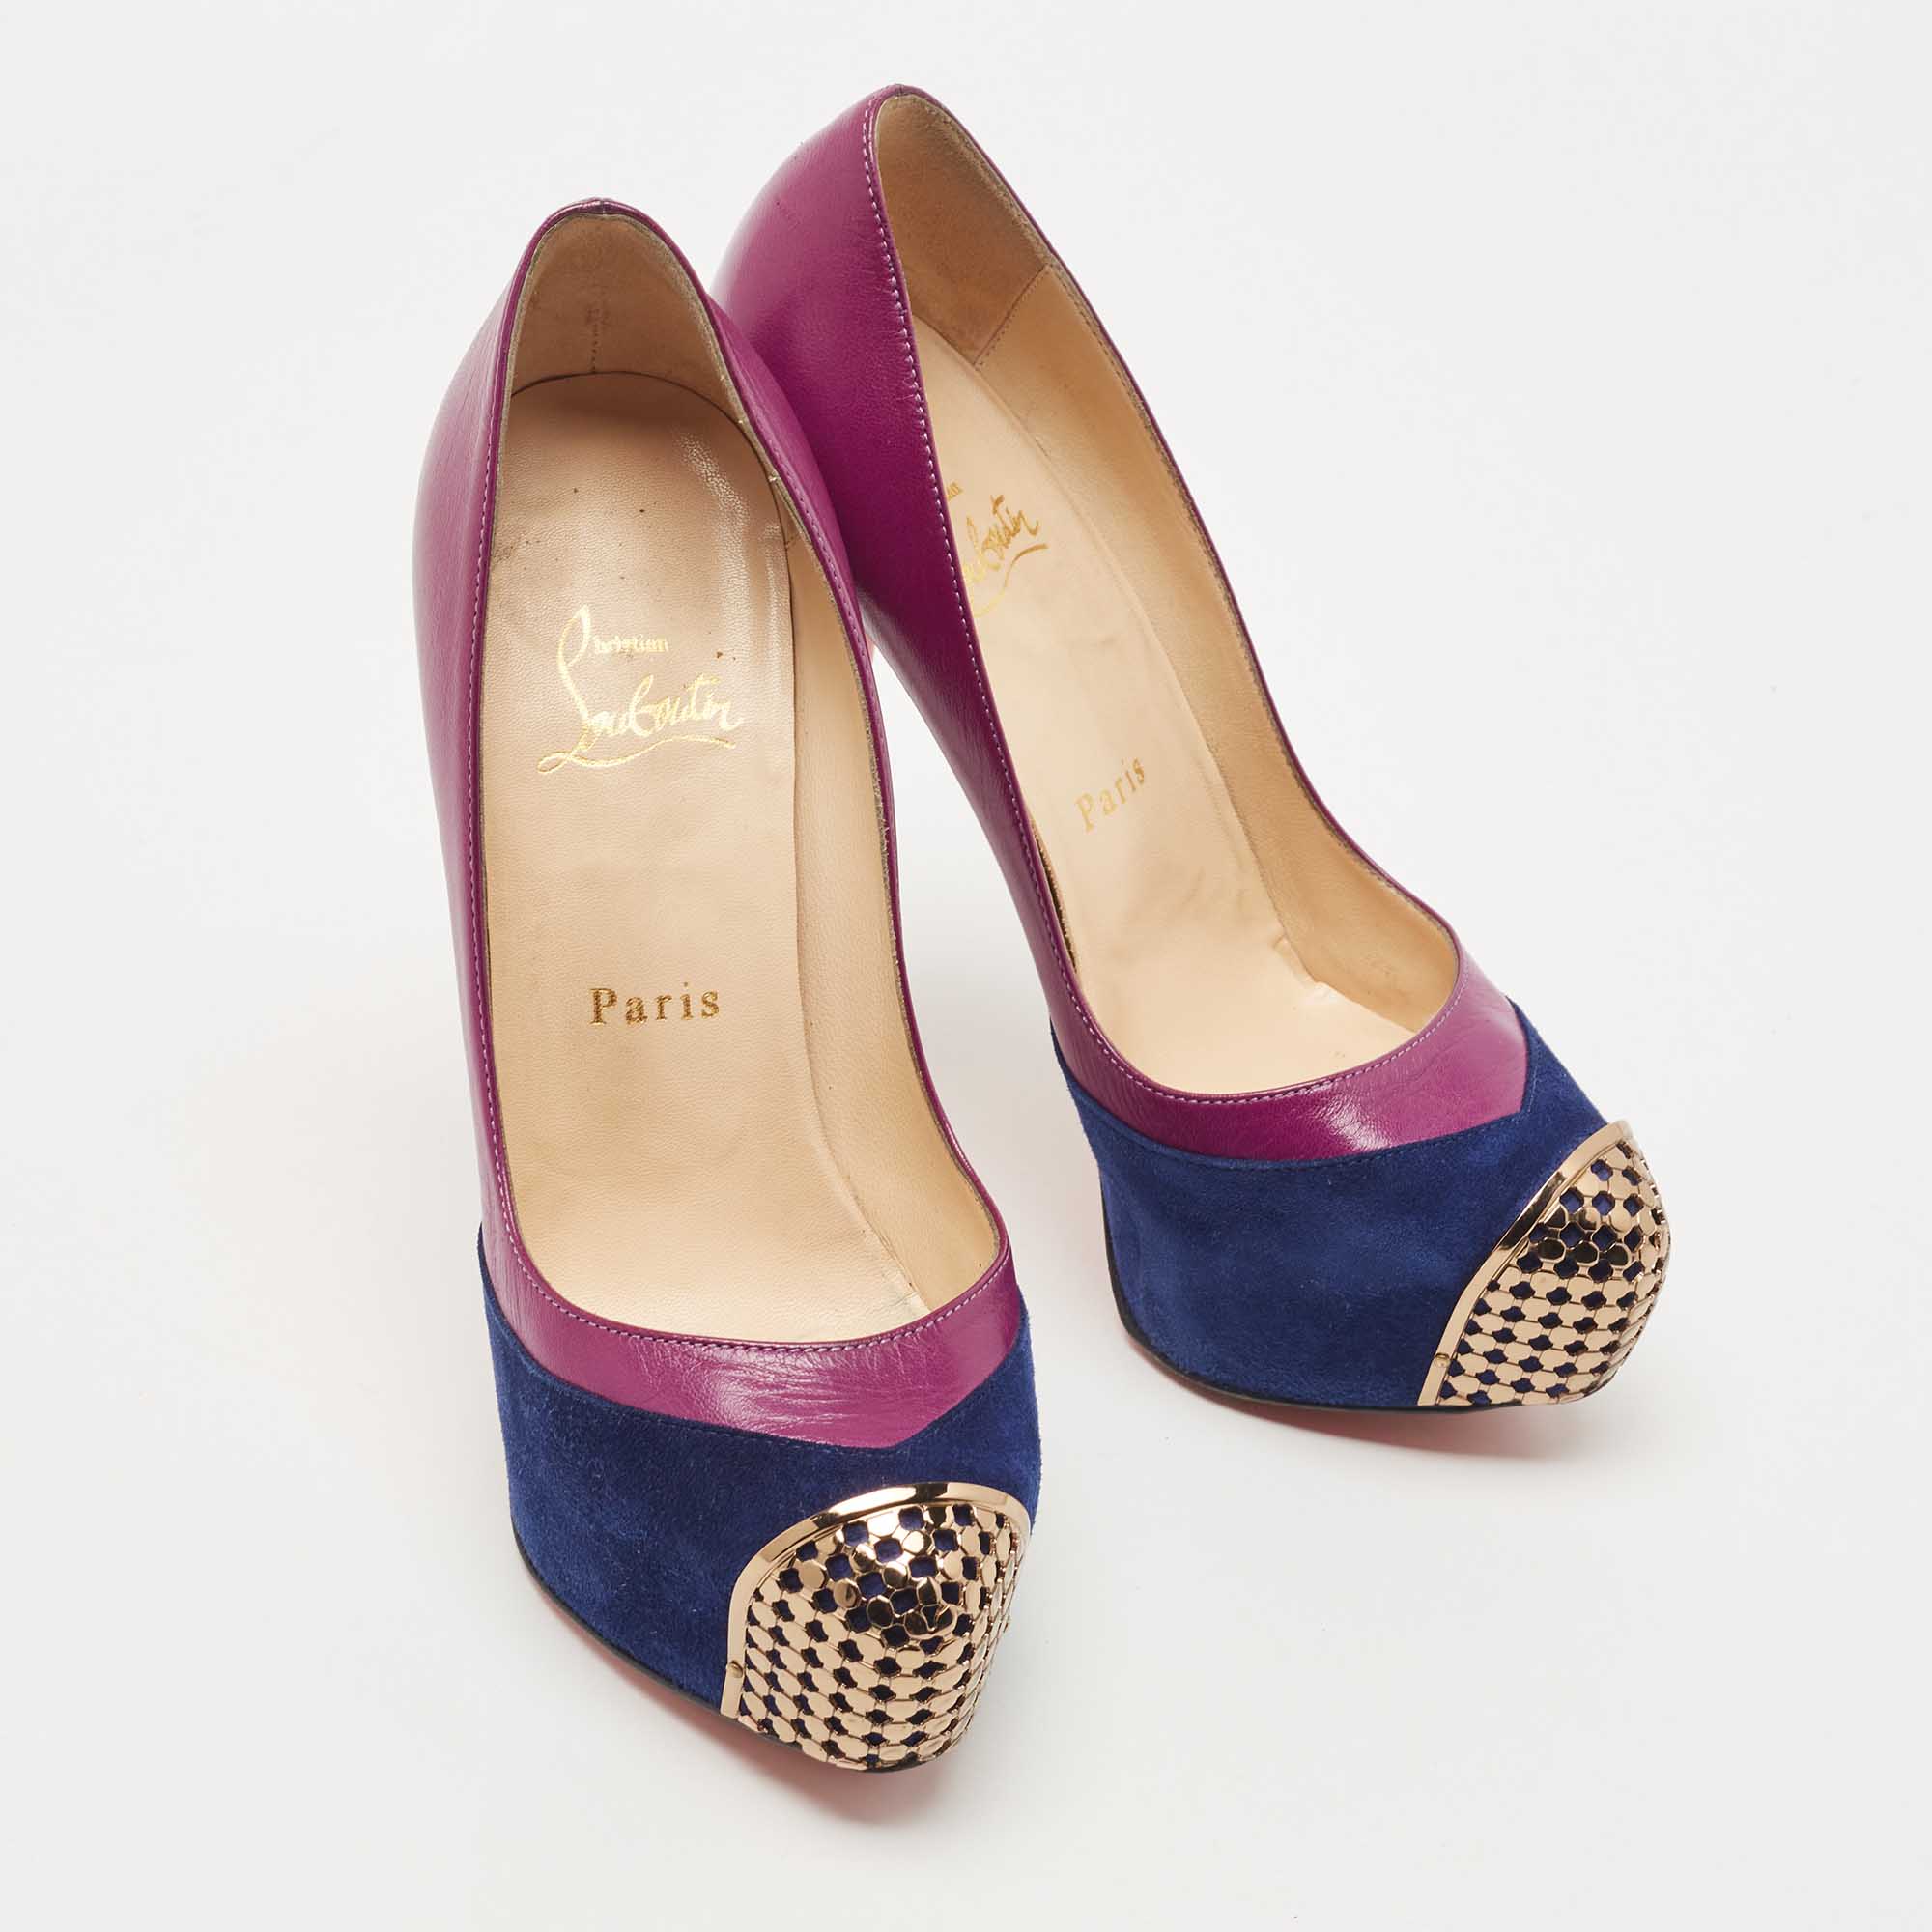 Christian Louboutin Purple Suede And Leather Maggie Platform Pumps Size 36.5